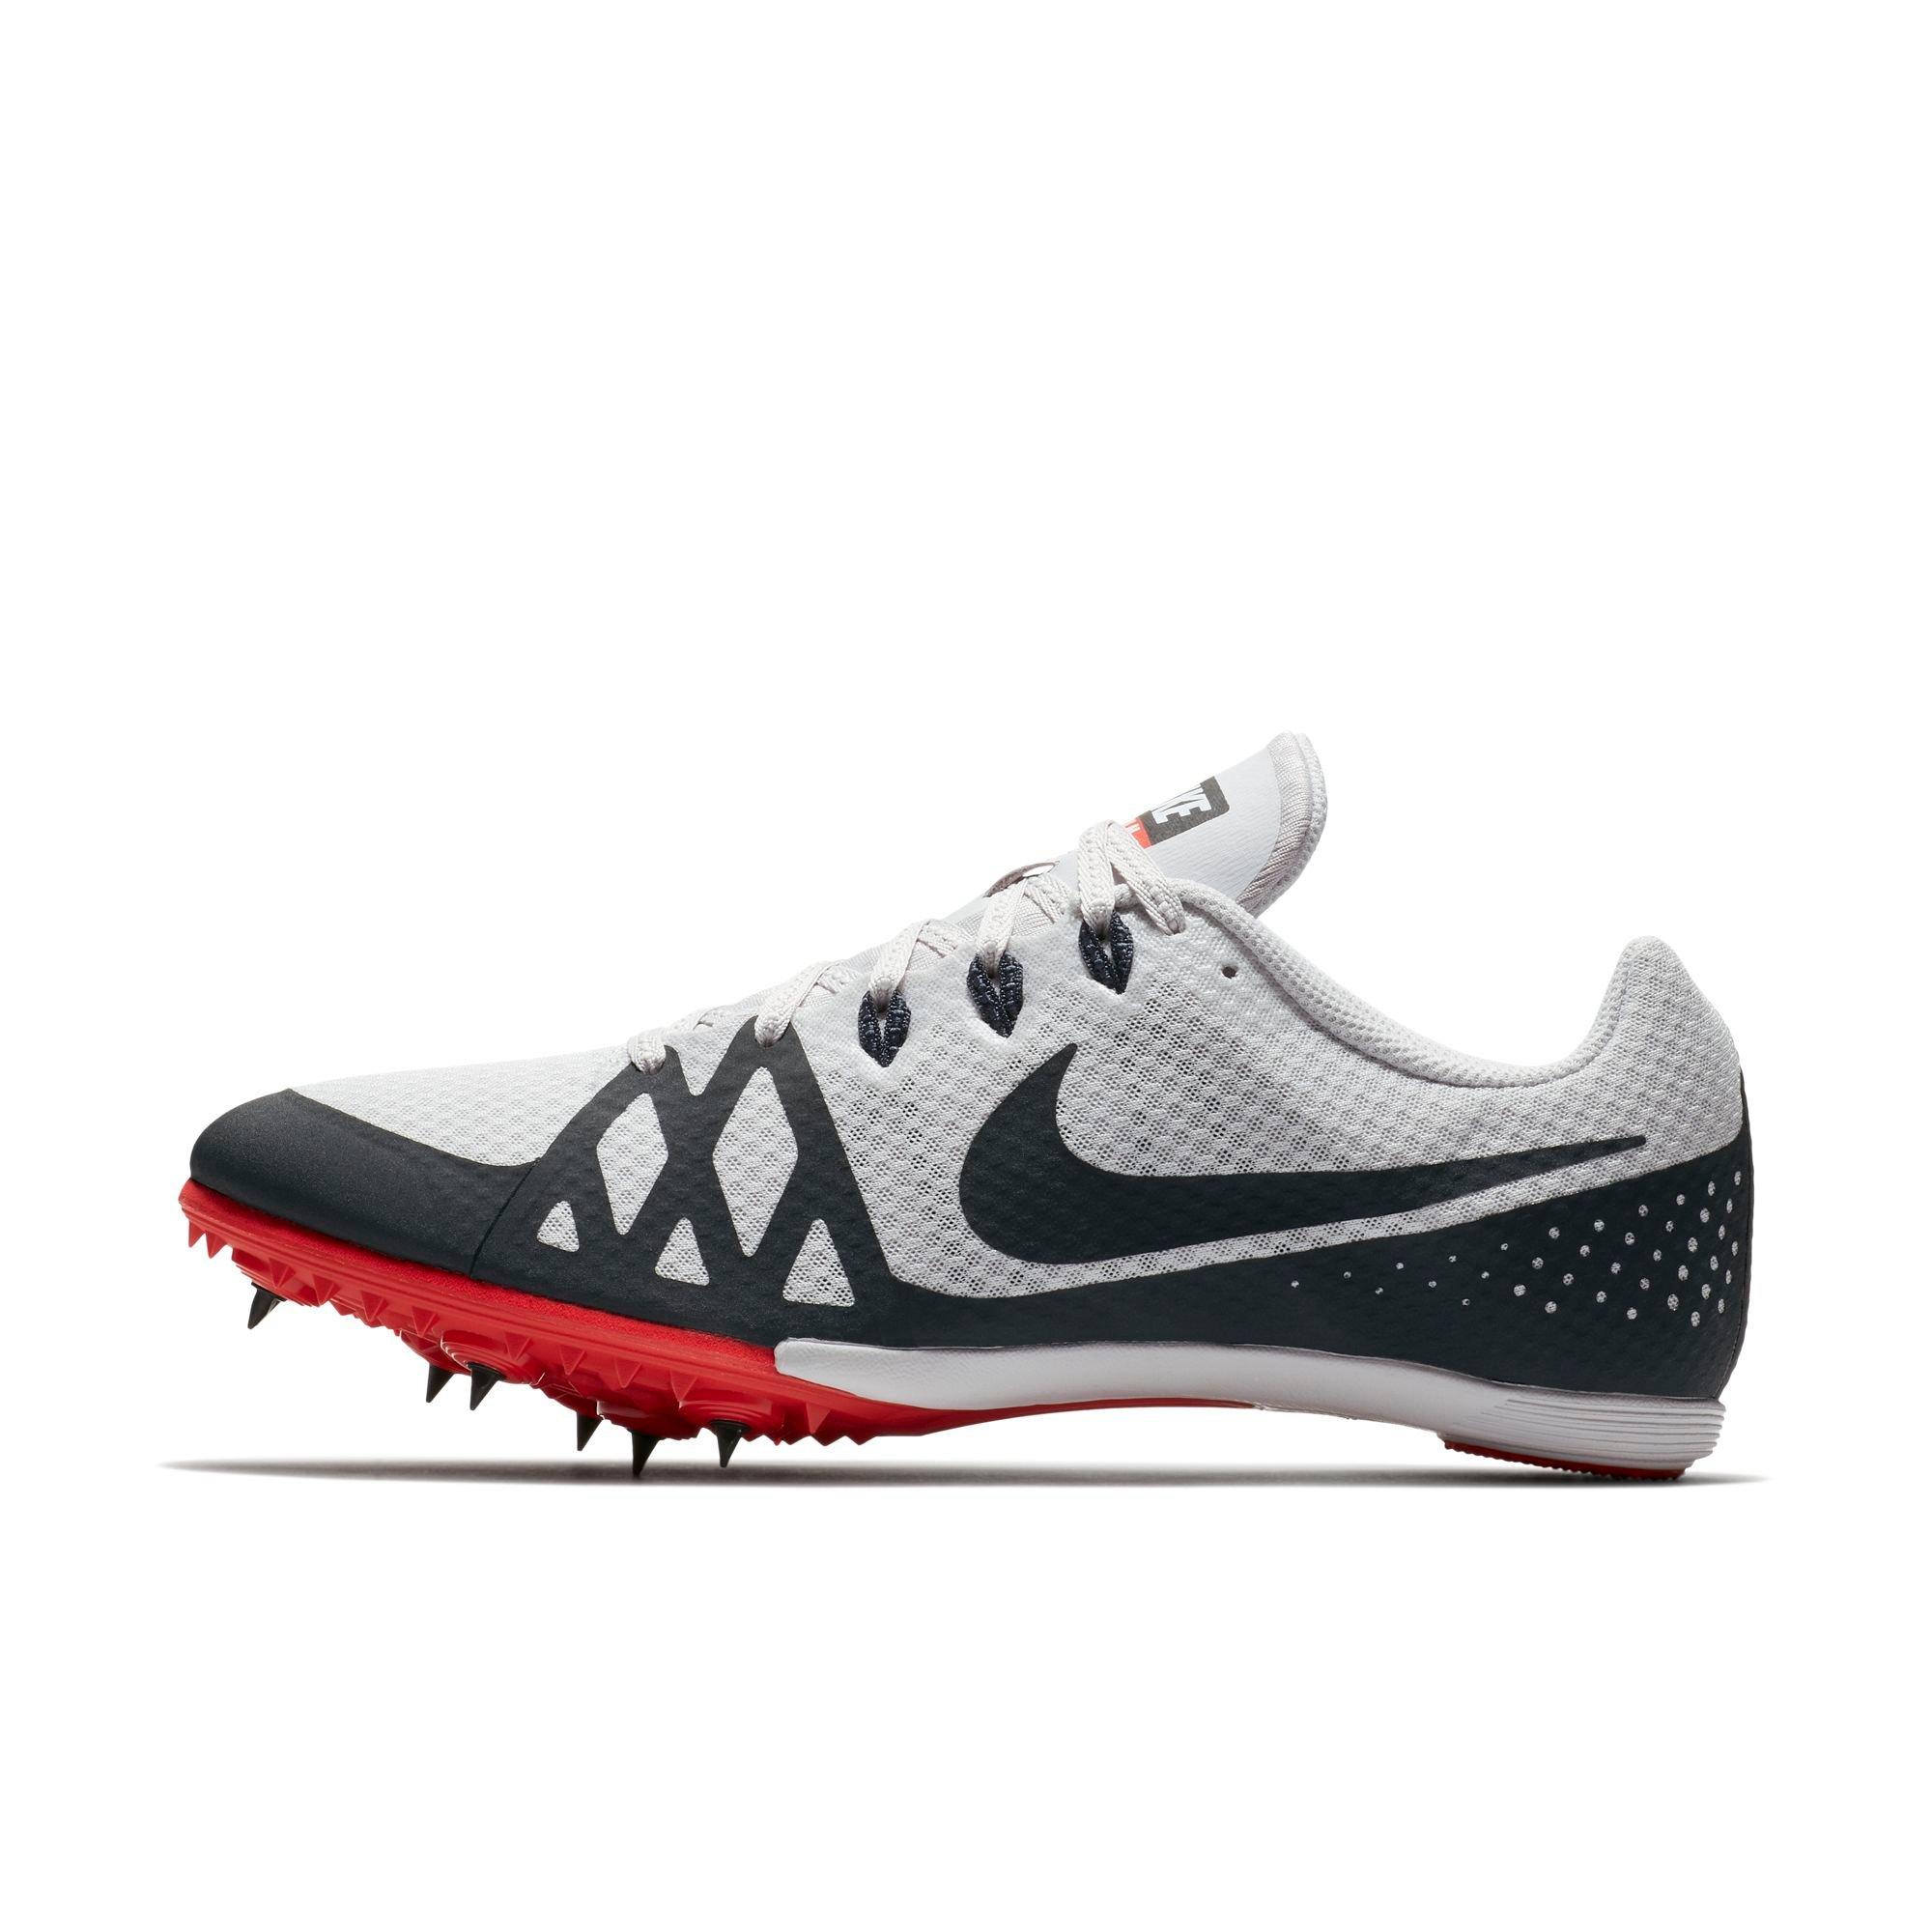 red and white track spikes